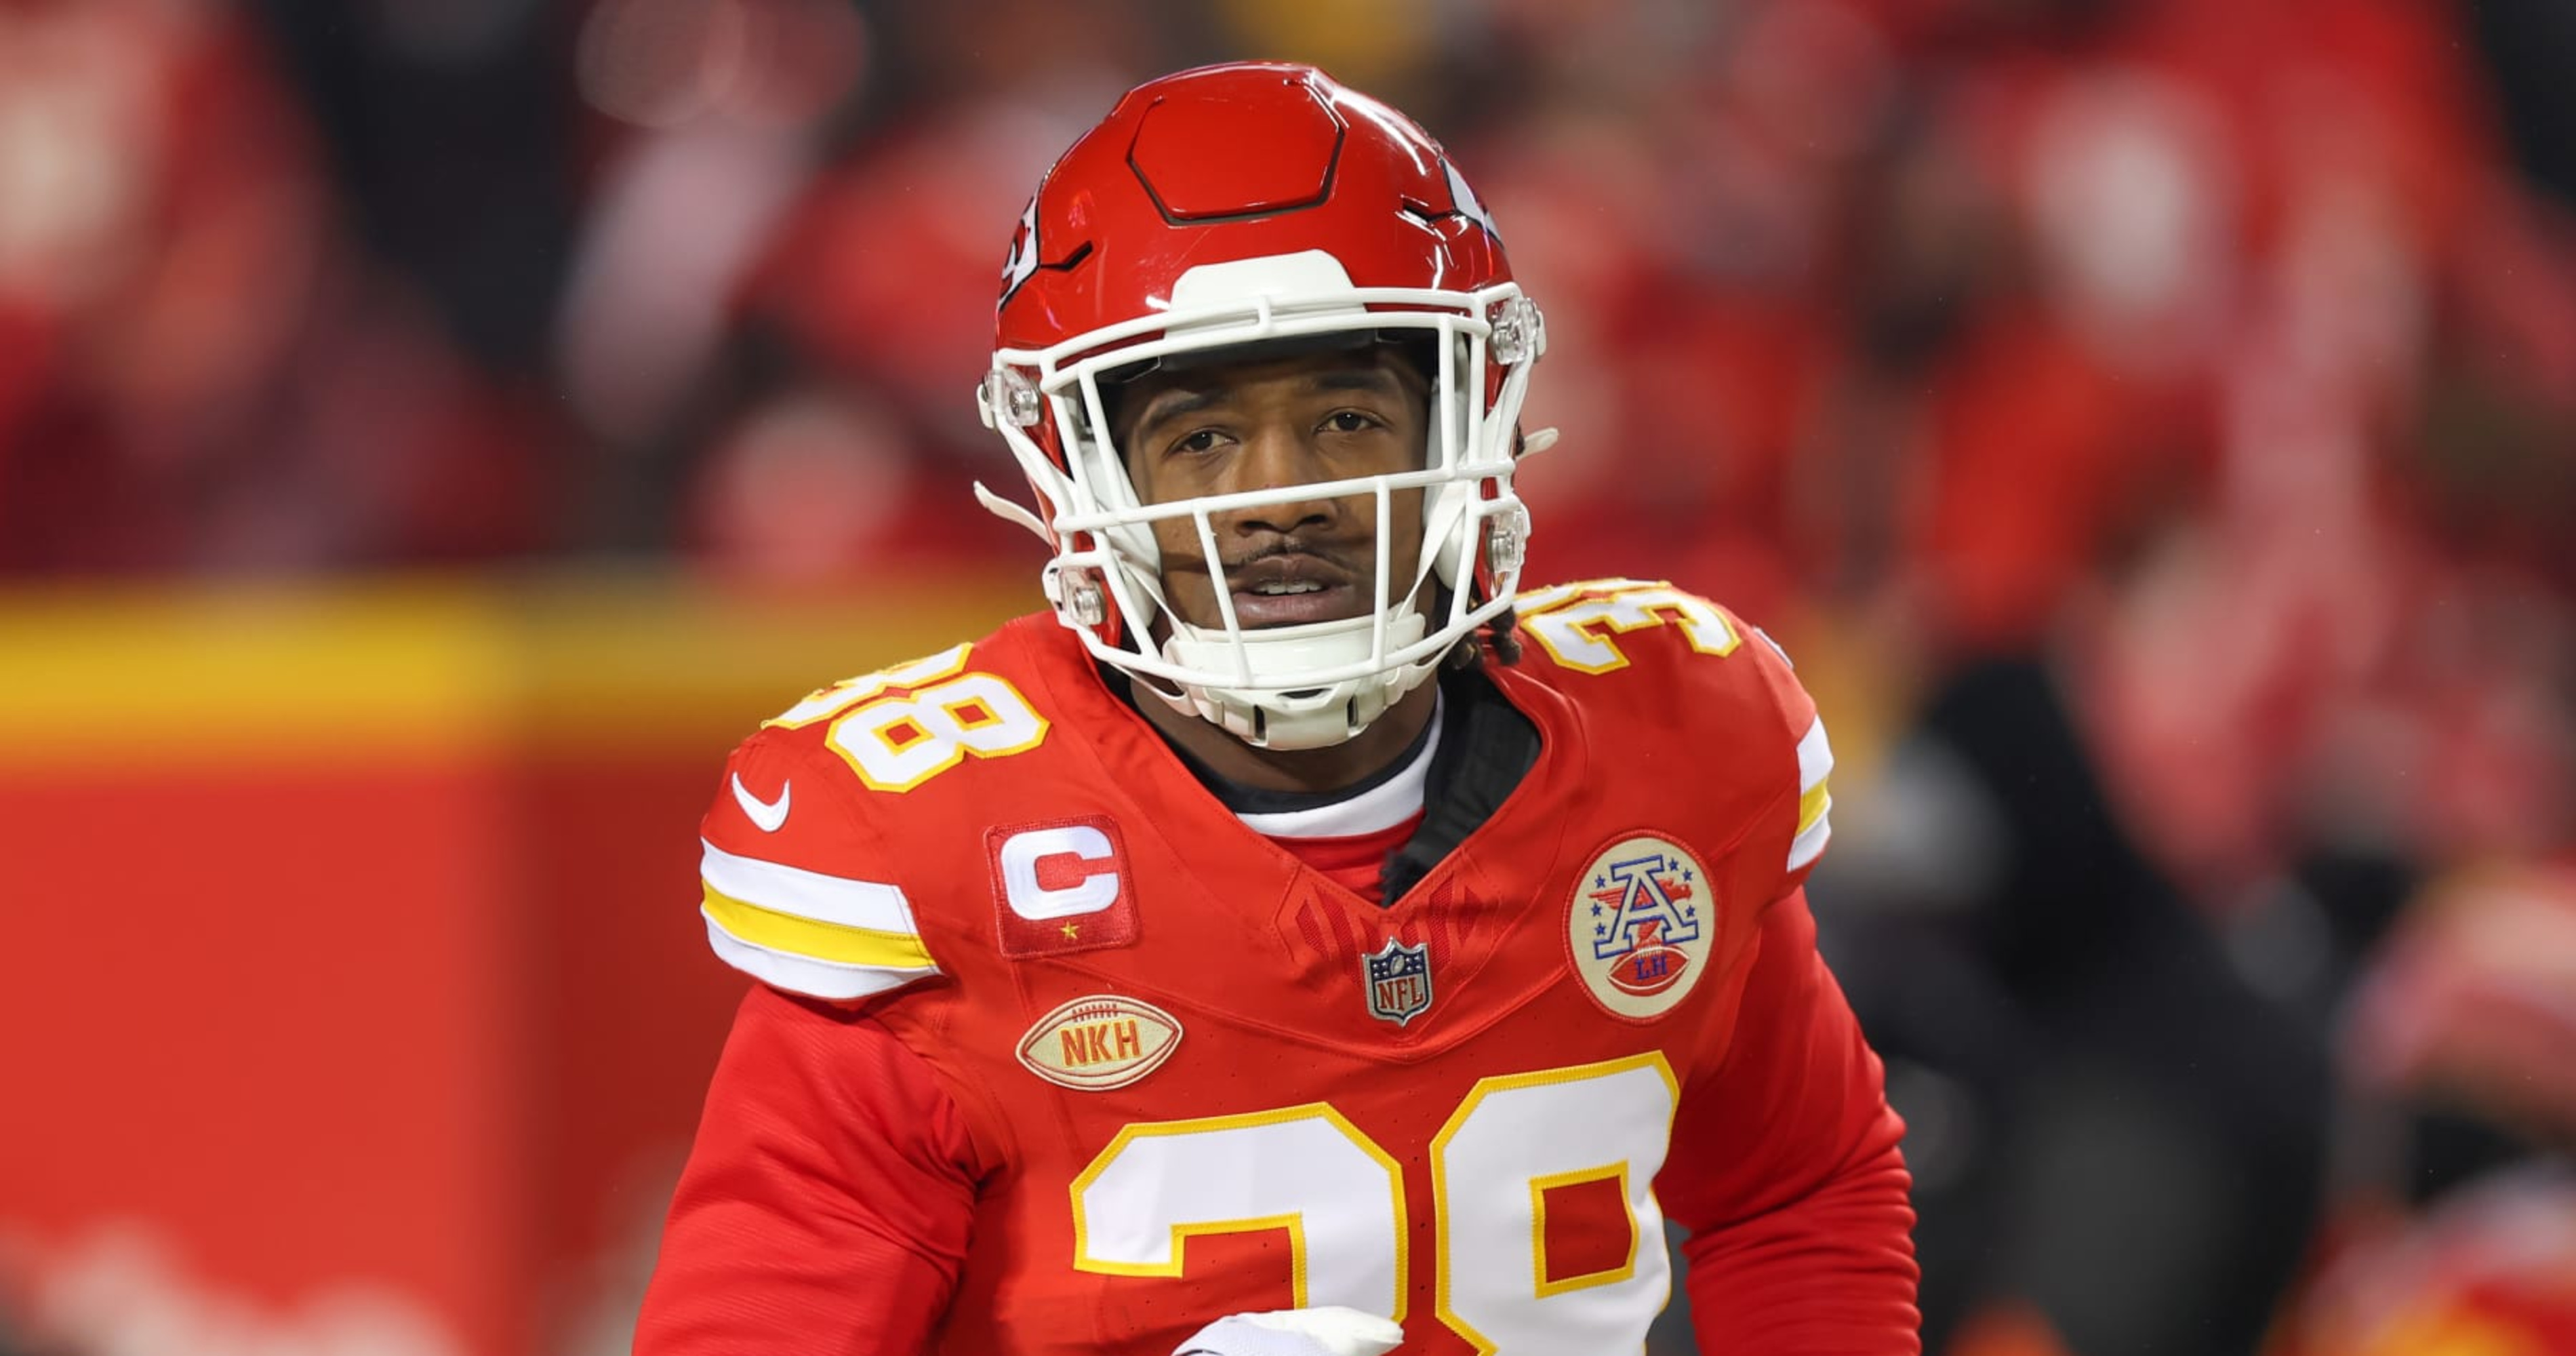 NFL Trade Rumors: Chiefs' L'Jarius Sneed Eyed by Teams; Lions, Dolphins May Target CB